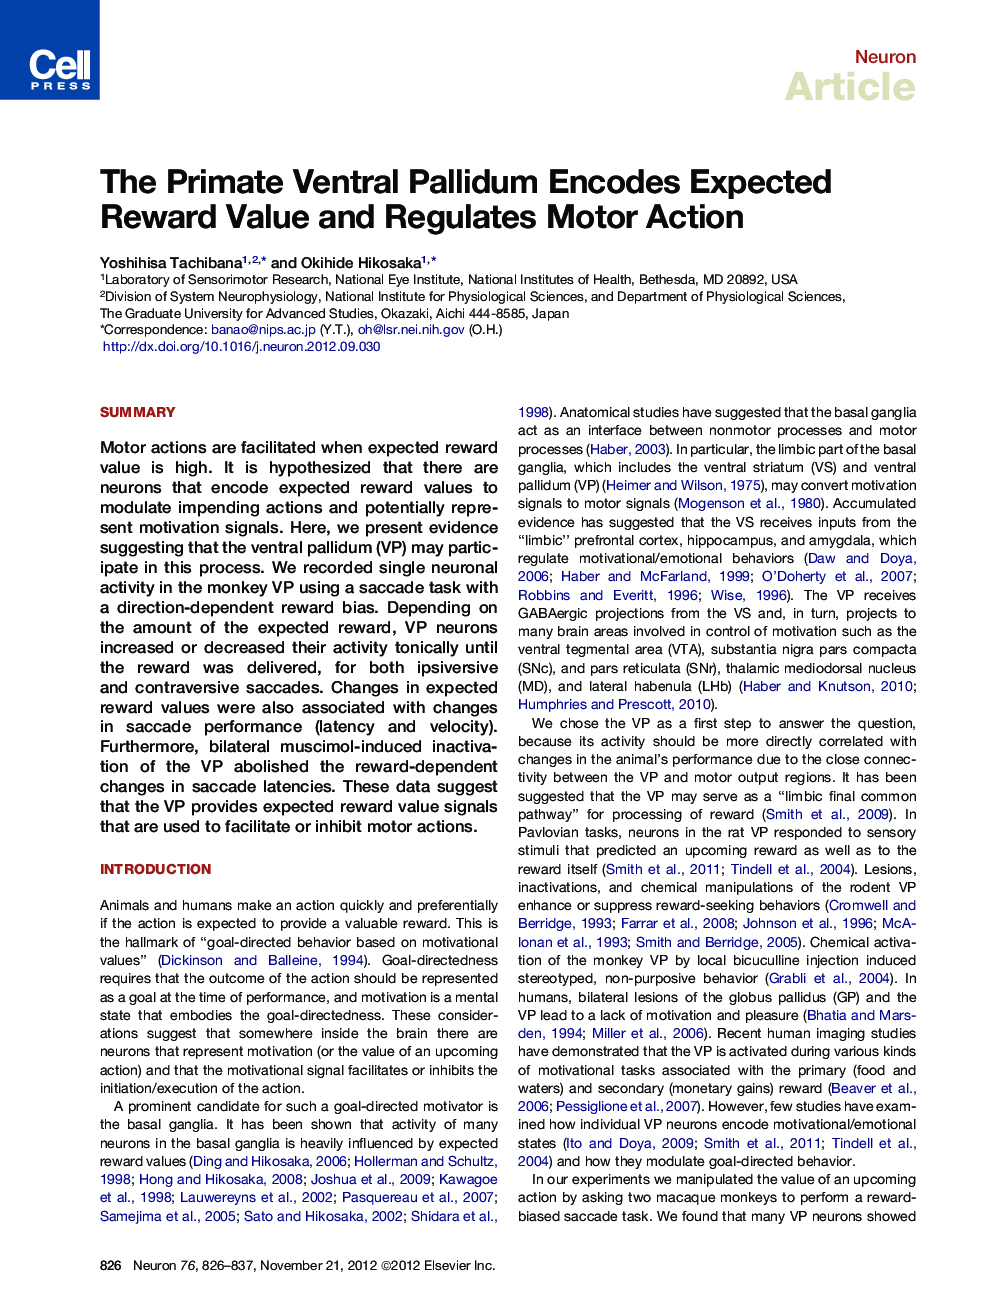 The Primate Ventral Pallidum Encodes Expected Reward Value and Regulates Motor Action